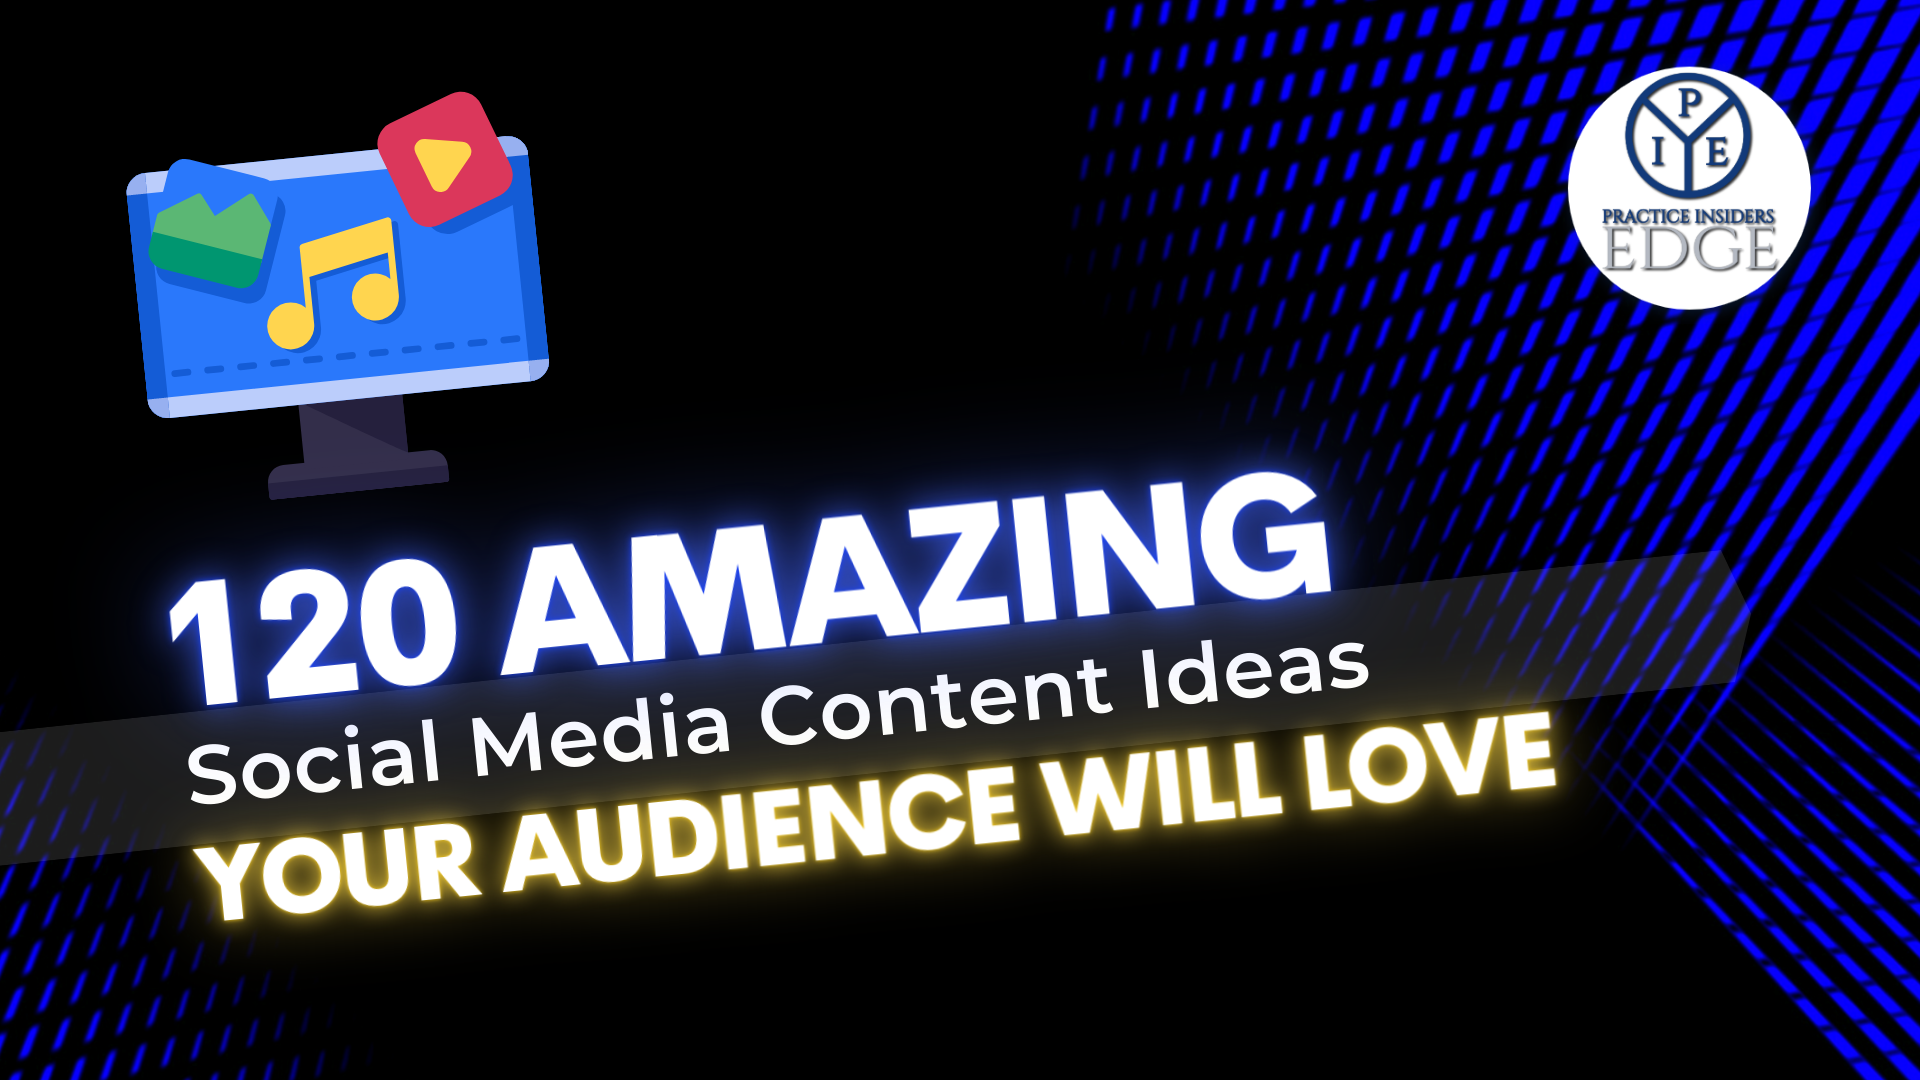 120 Amazing Social Media Content Ideas Your Audience Will Love